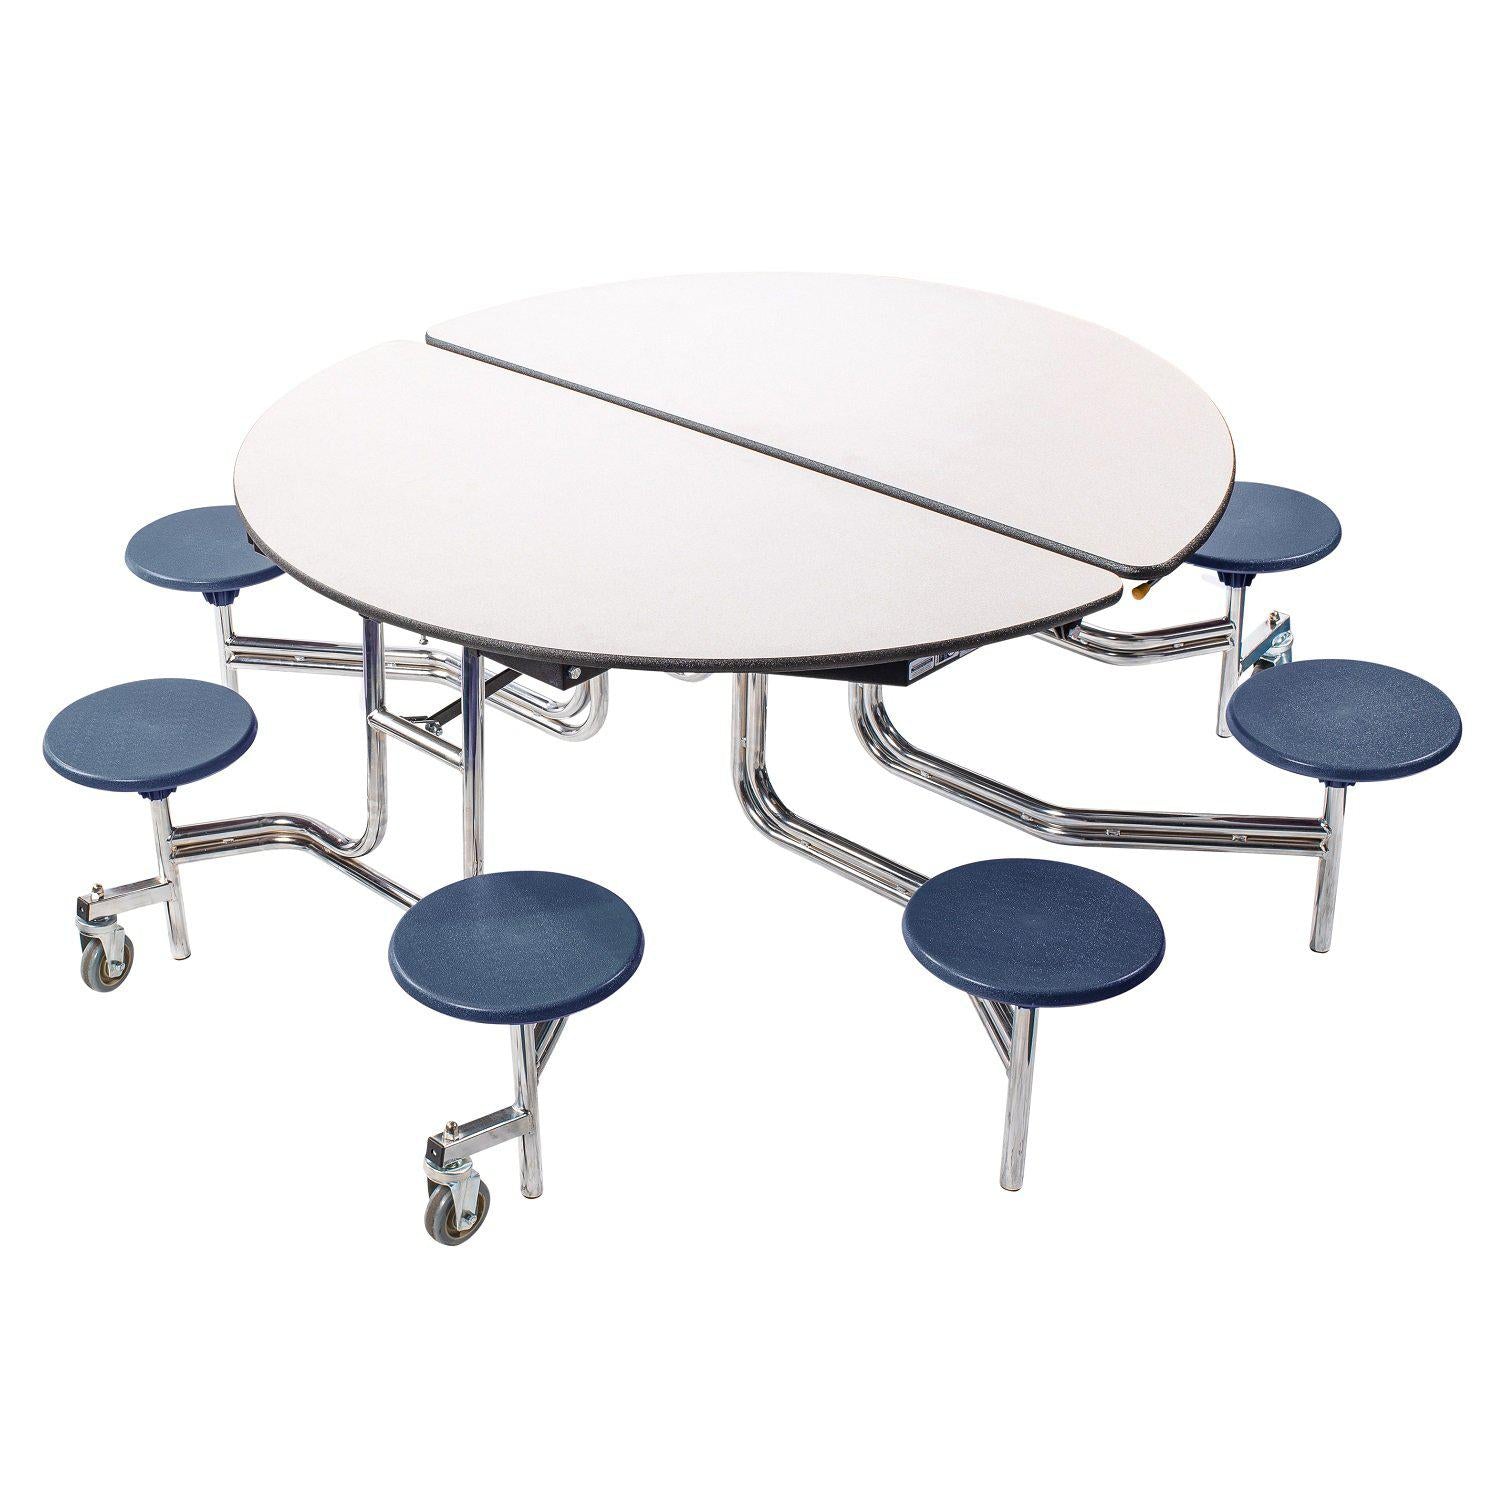 Mobile Cafeteria Table with 8 Stools, 60" Round, Particleboard Core, Vinyl T-Mold Edge, Chrome Frame